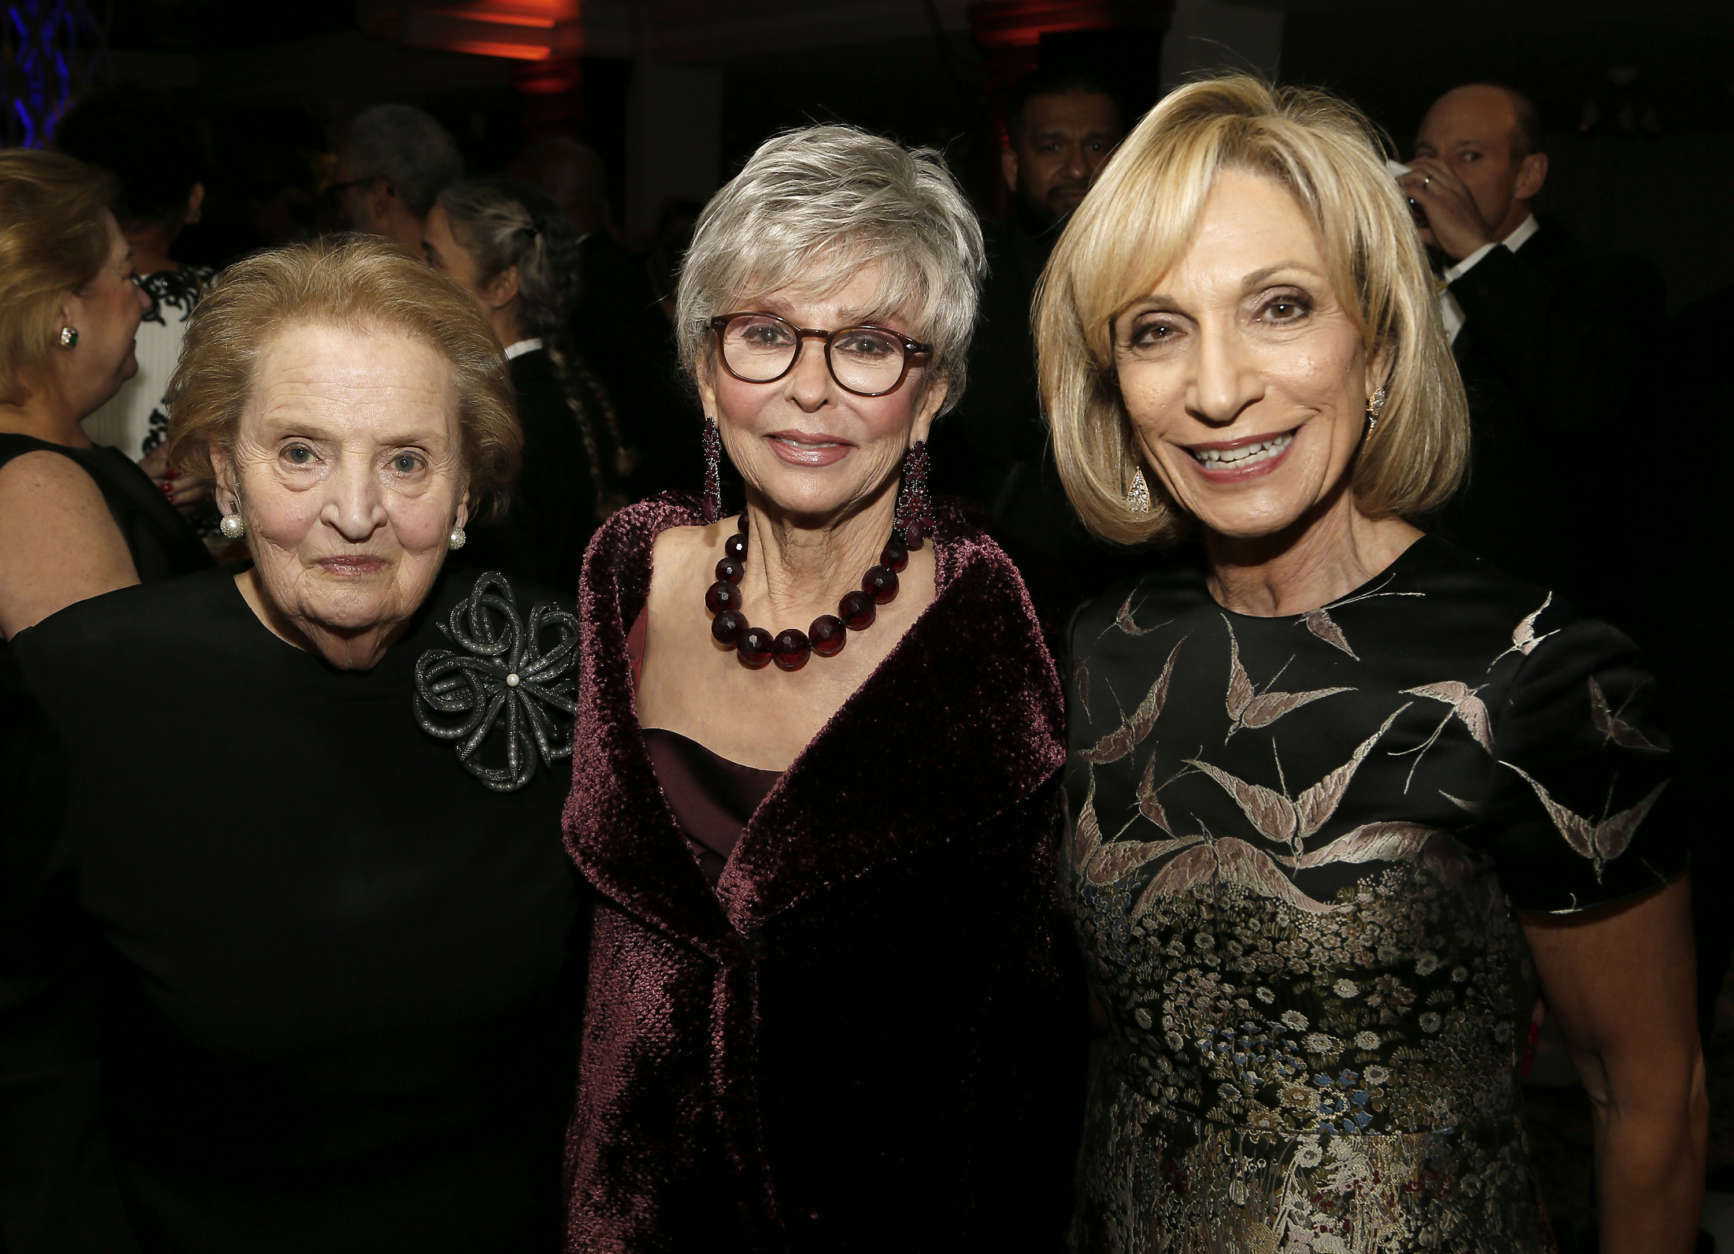 IMAGE DISTRIBUTED FOR NATIONAL PORTRAIT GALLERY - Former Secretary of State Dr. Madeleine K. Albright, left, multi-award-winning actress Rita Moreno, center, and NBC News and MSNBC journalist Andrea Mitchell, right, attend The American Portrait Gala 2017 at Smithsonian's National Portrait Gallery on Sunday, Nov. 19, 2017 in Washington, D.C. (Paul Morigi/AP Images for National Portrait Gallery)